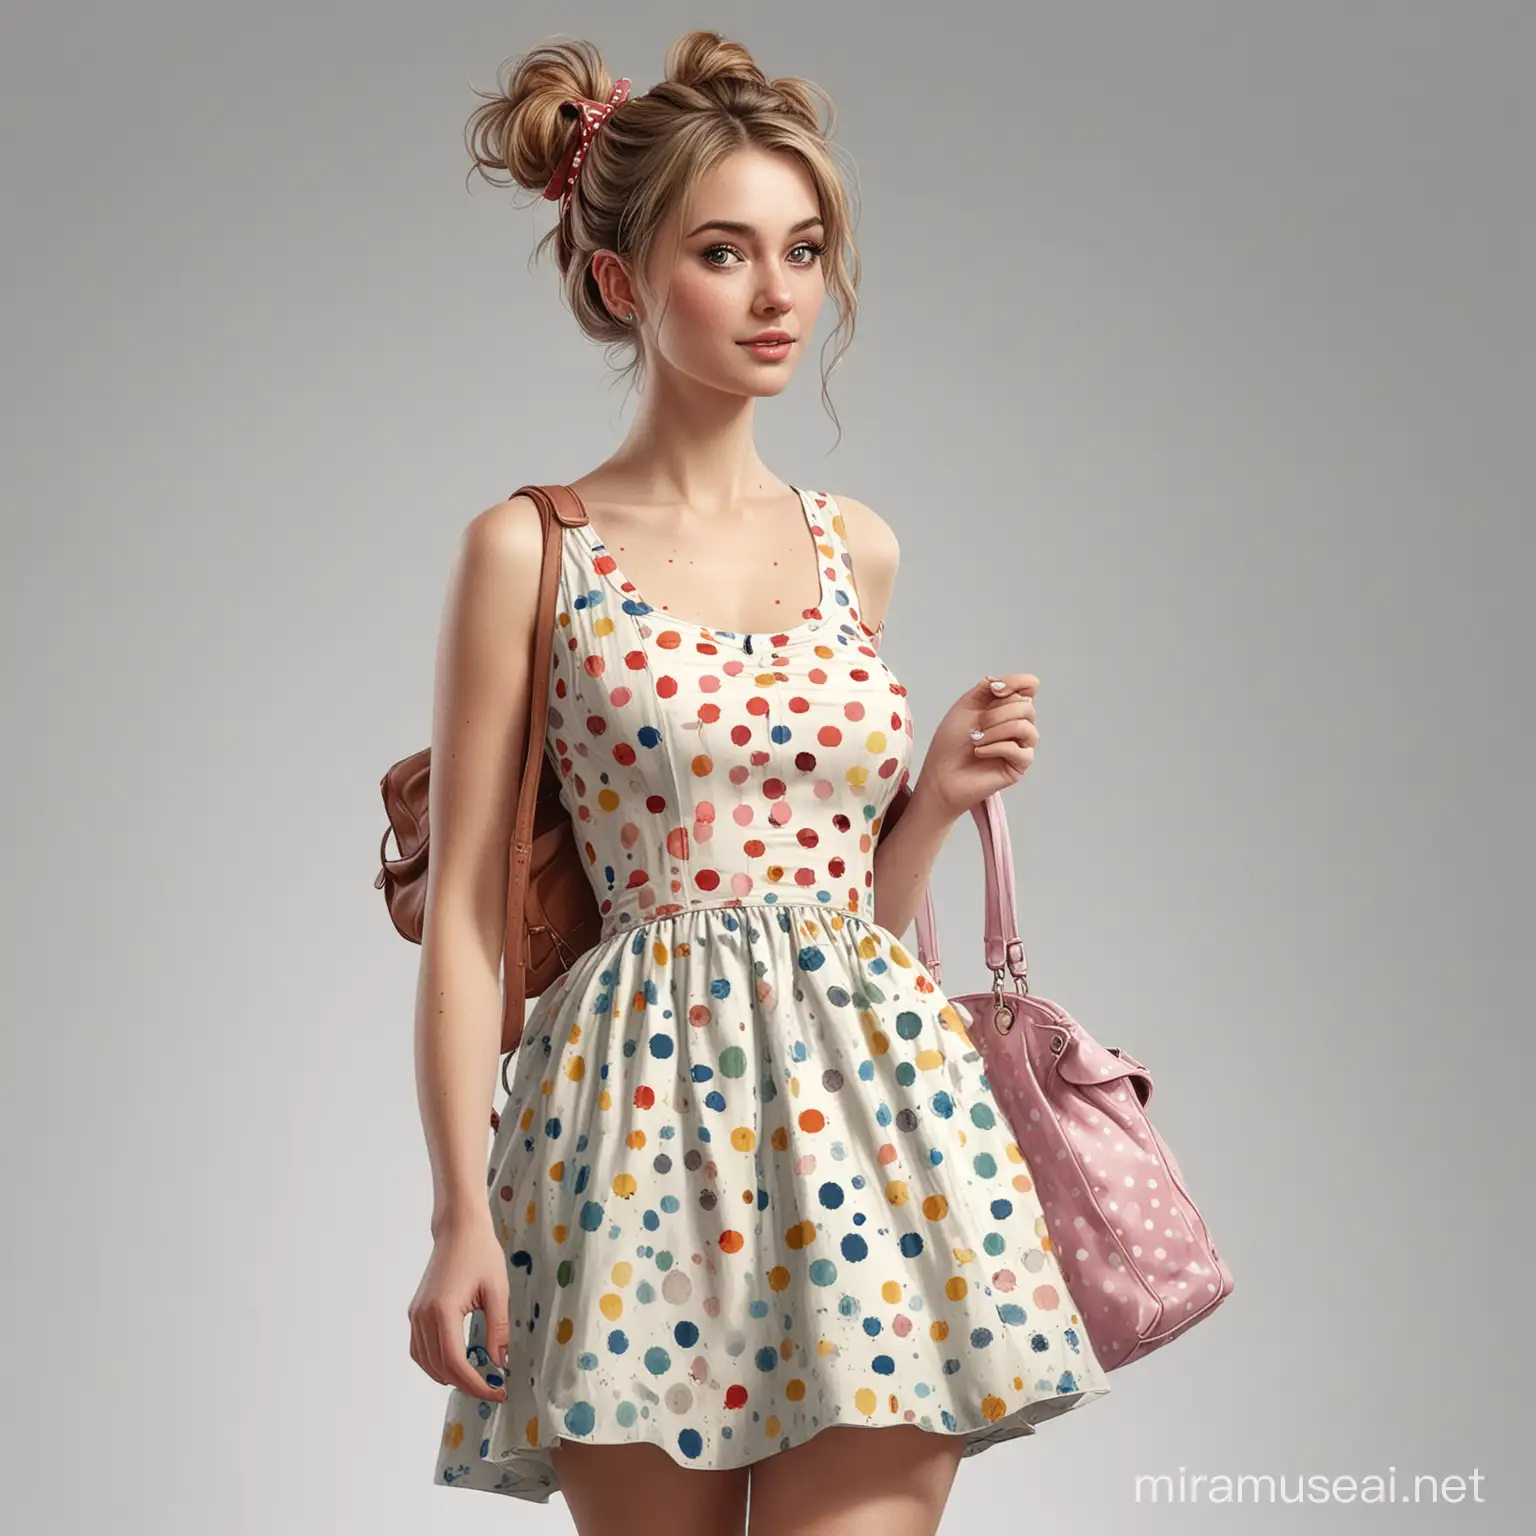 realistic full body shot of a beautiful woman with messy buns in hair, a handbag, hairbow with dots, dress with dots, cartoonish, inventive character designs, color settings, 
highly detailed digital art, fixed on white background, watercolor effect, james gurney art --v 5.2 --s 250
